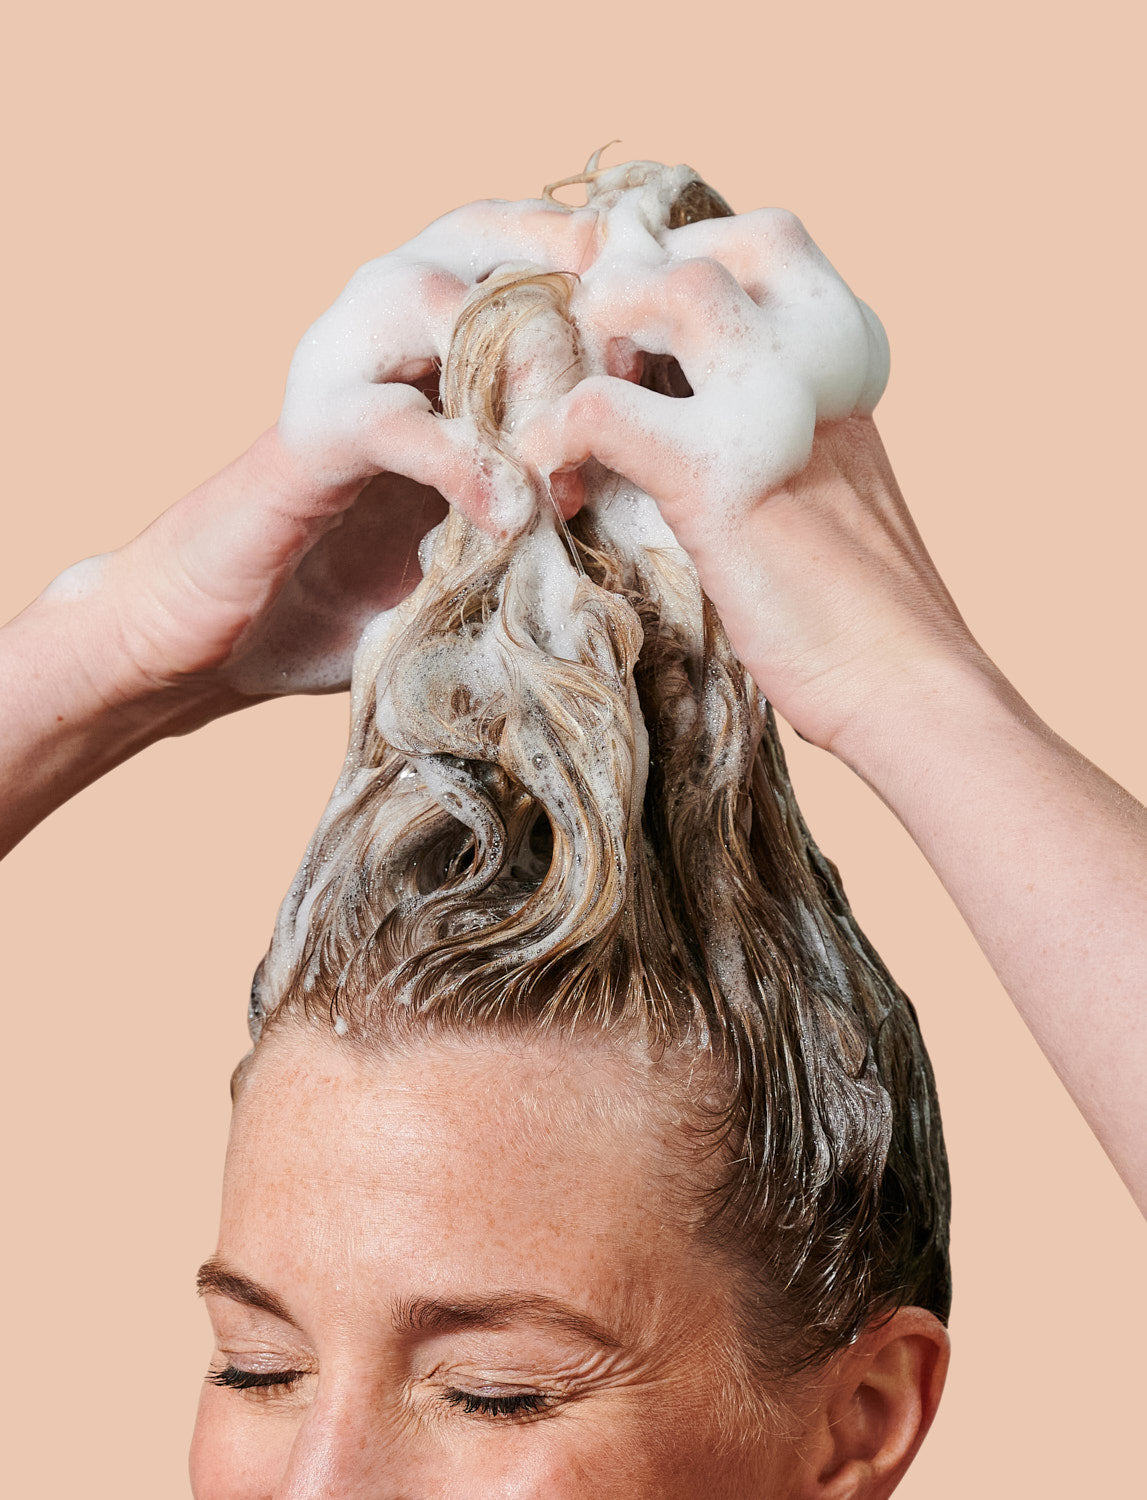 Grounded Shampoo: supports a balanced scalp